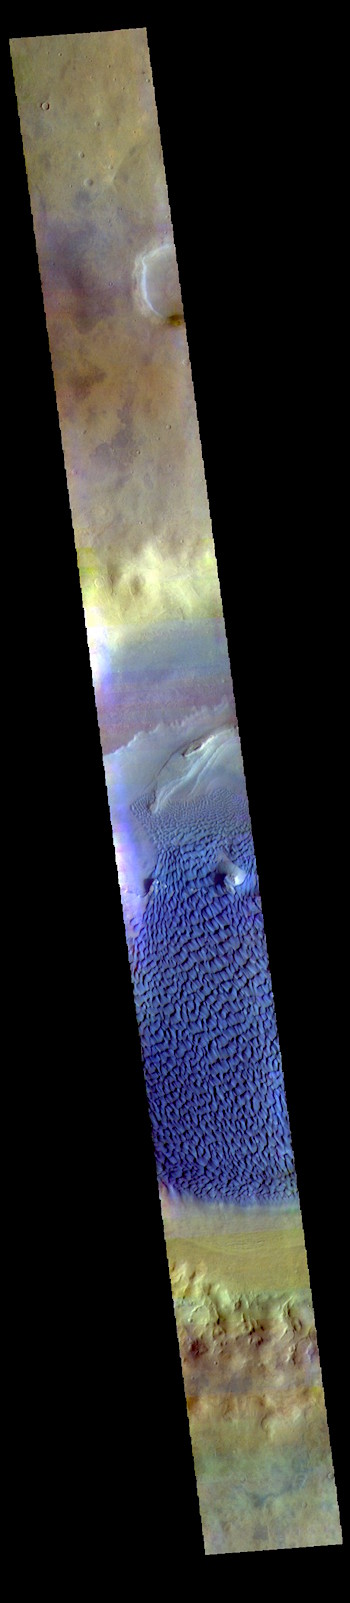 Marching dunes in Rabe Crater (THEMIS_IOTD_20171221)